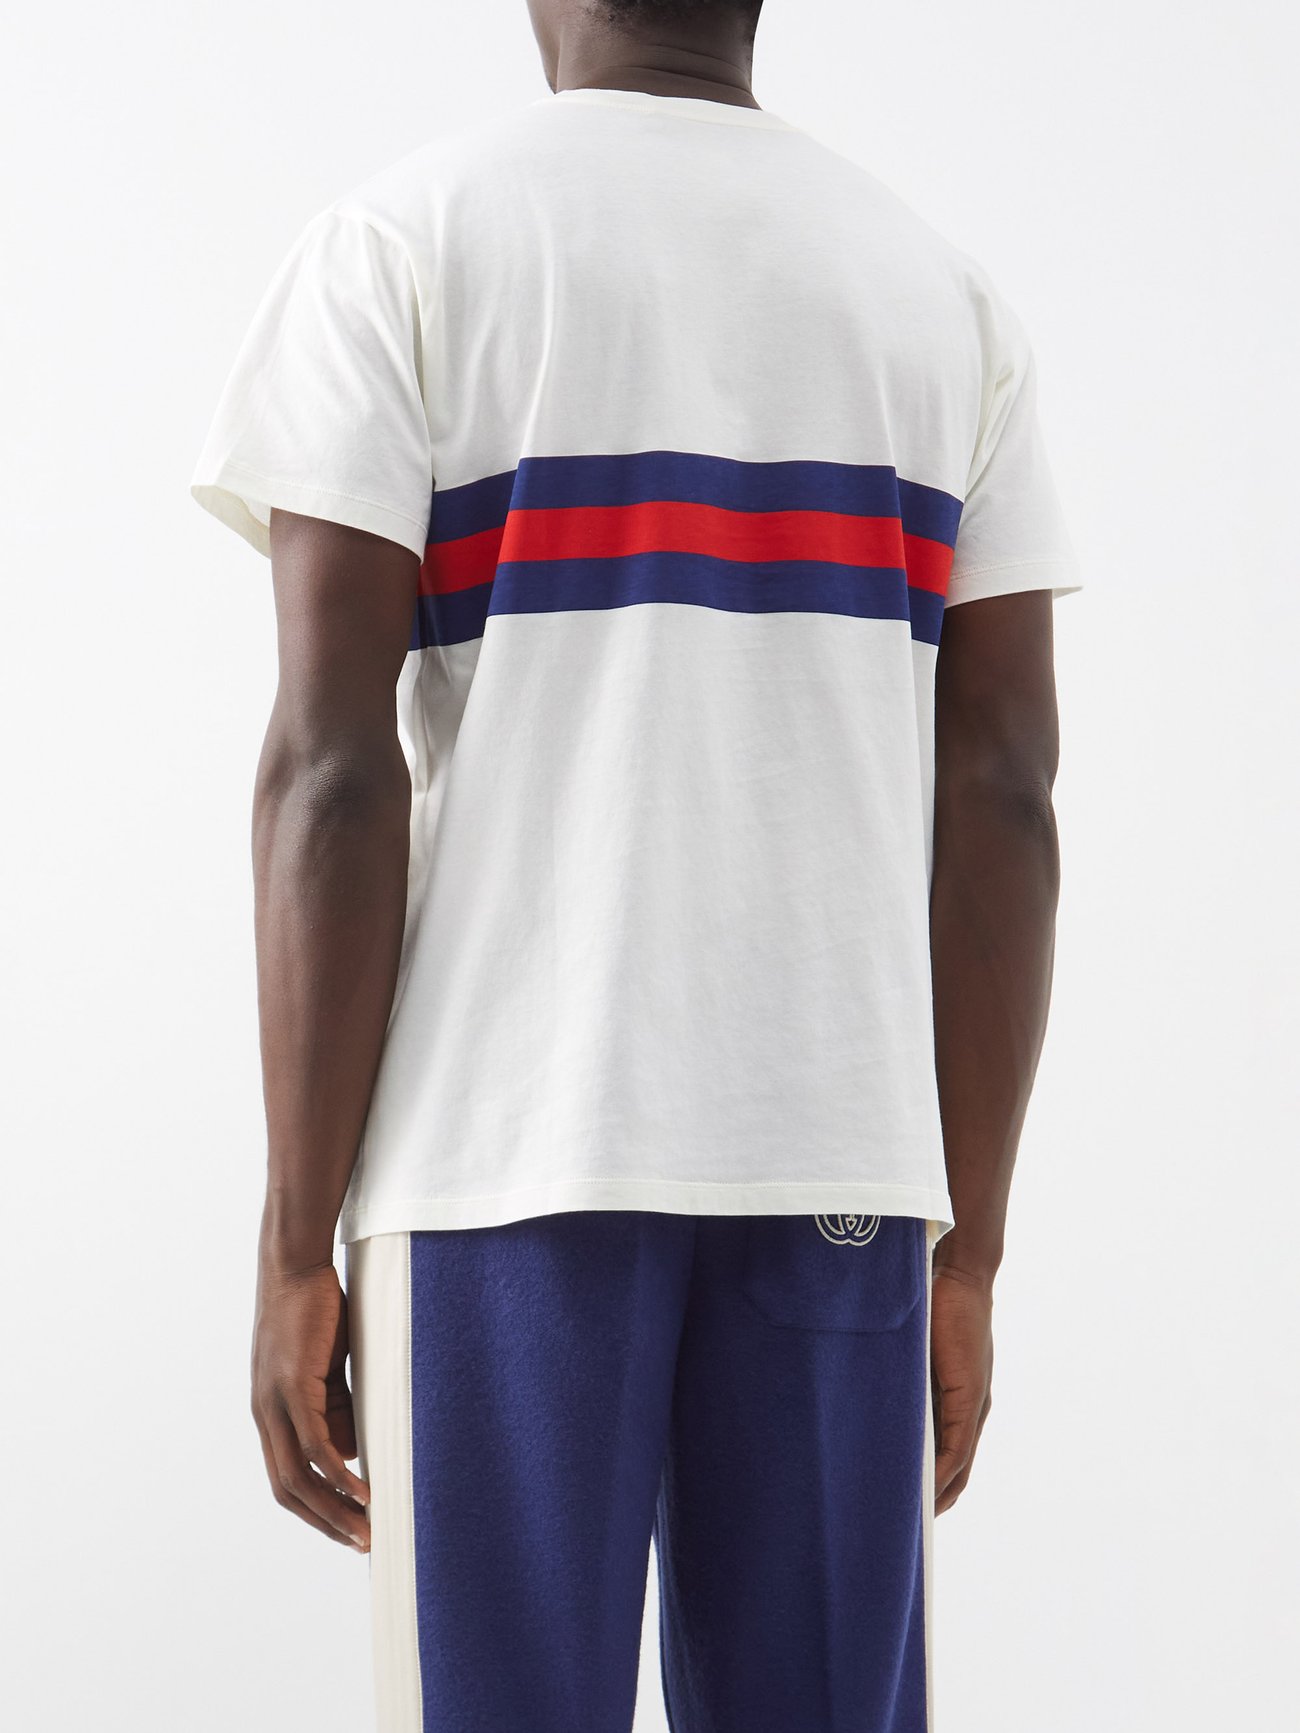 Logo Cotton Jersey T Shirt in White - Gucci